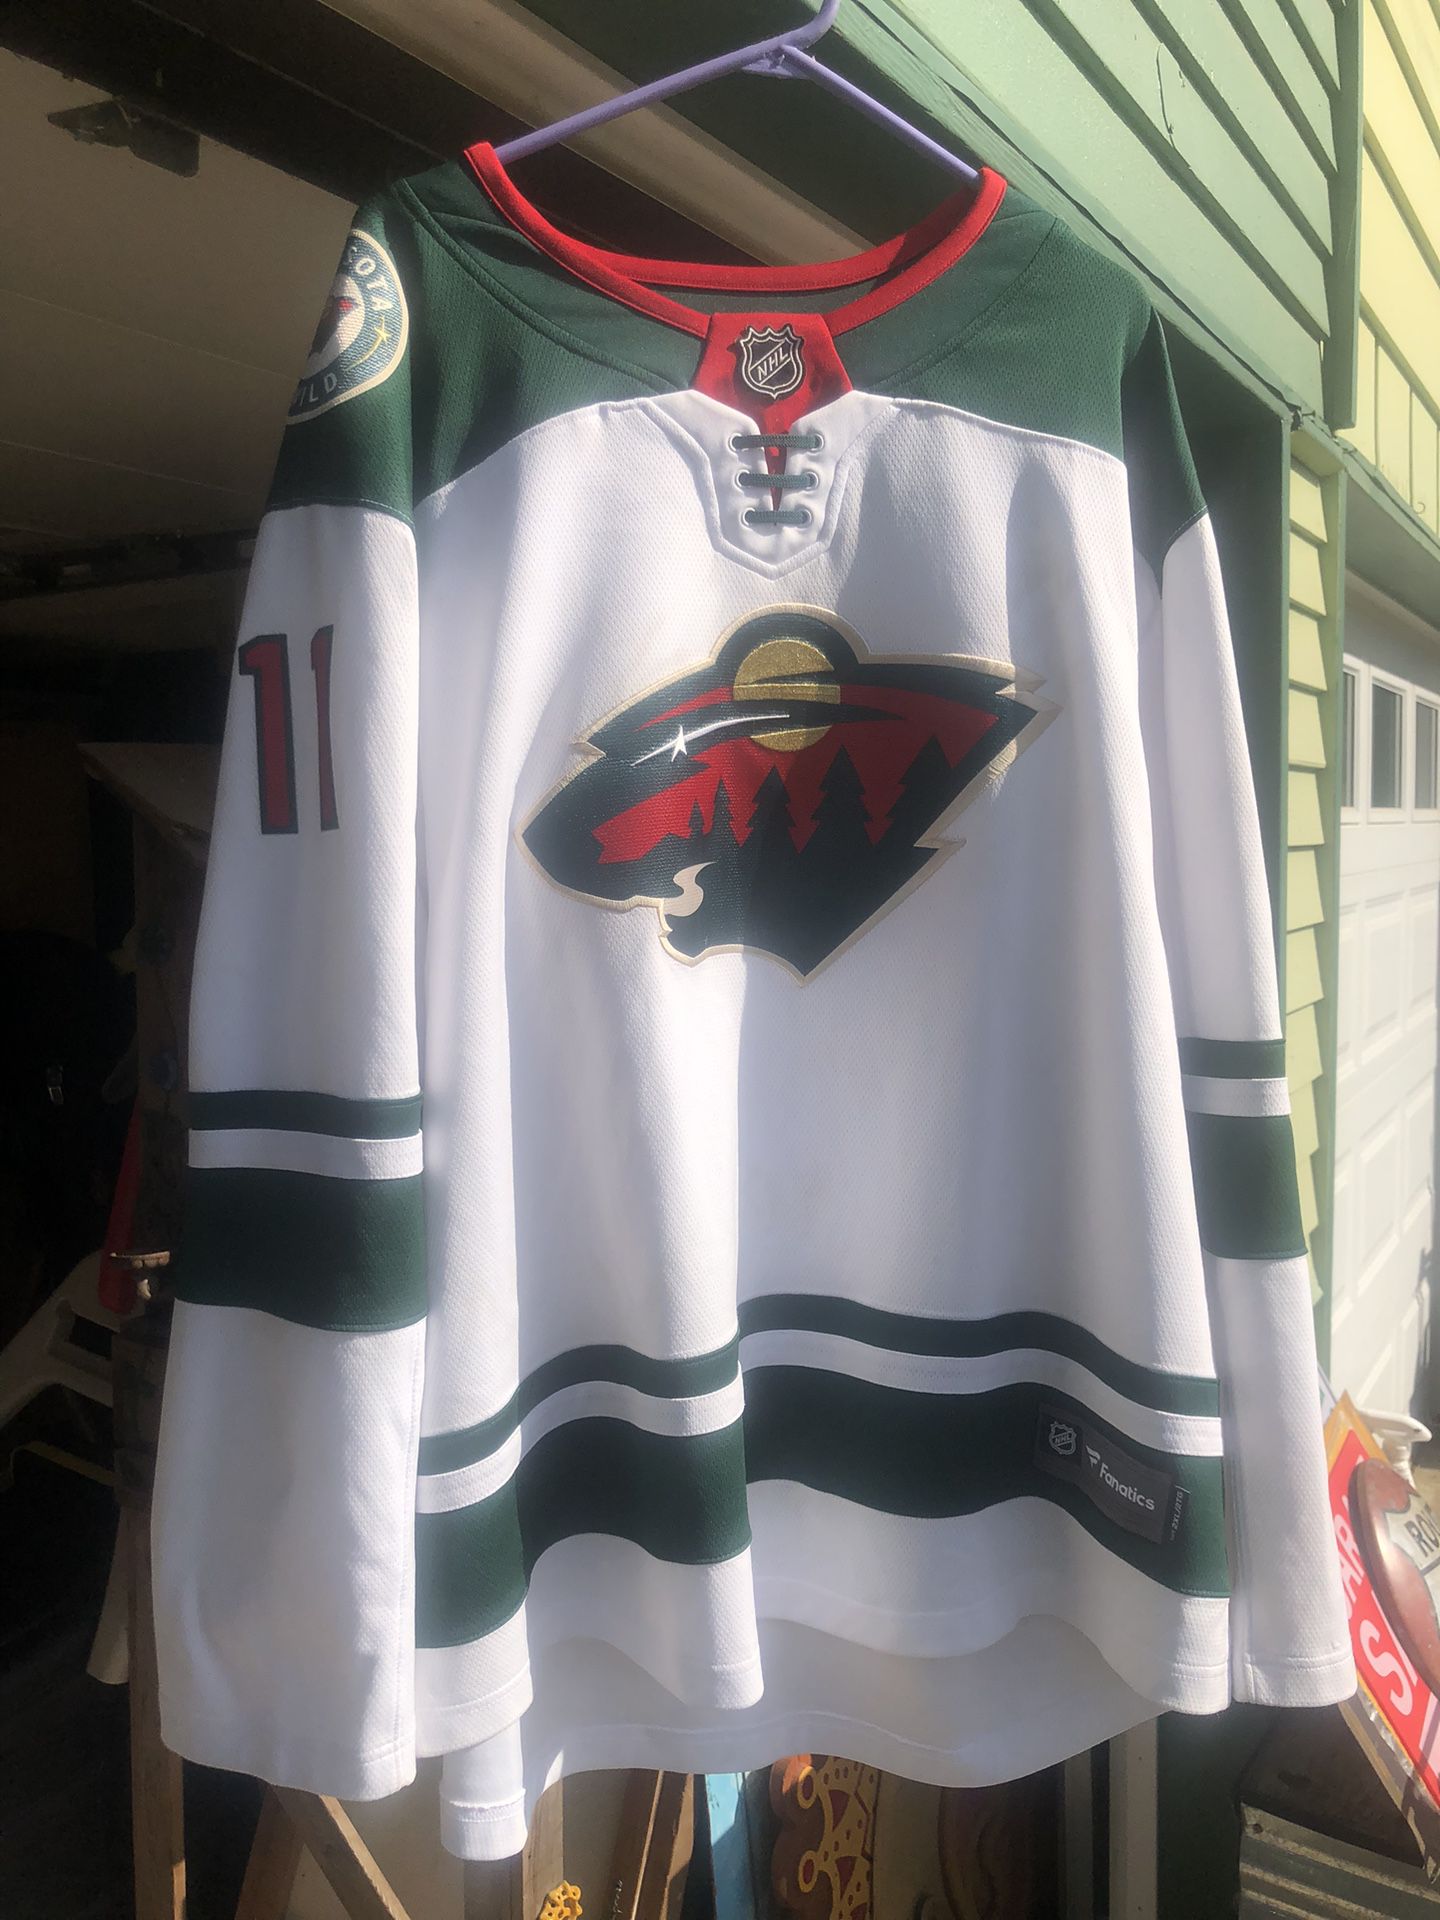 Minnesota wild #11 Parise official NHL hockey jersey in great condition.